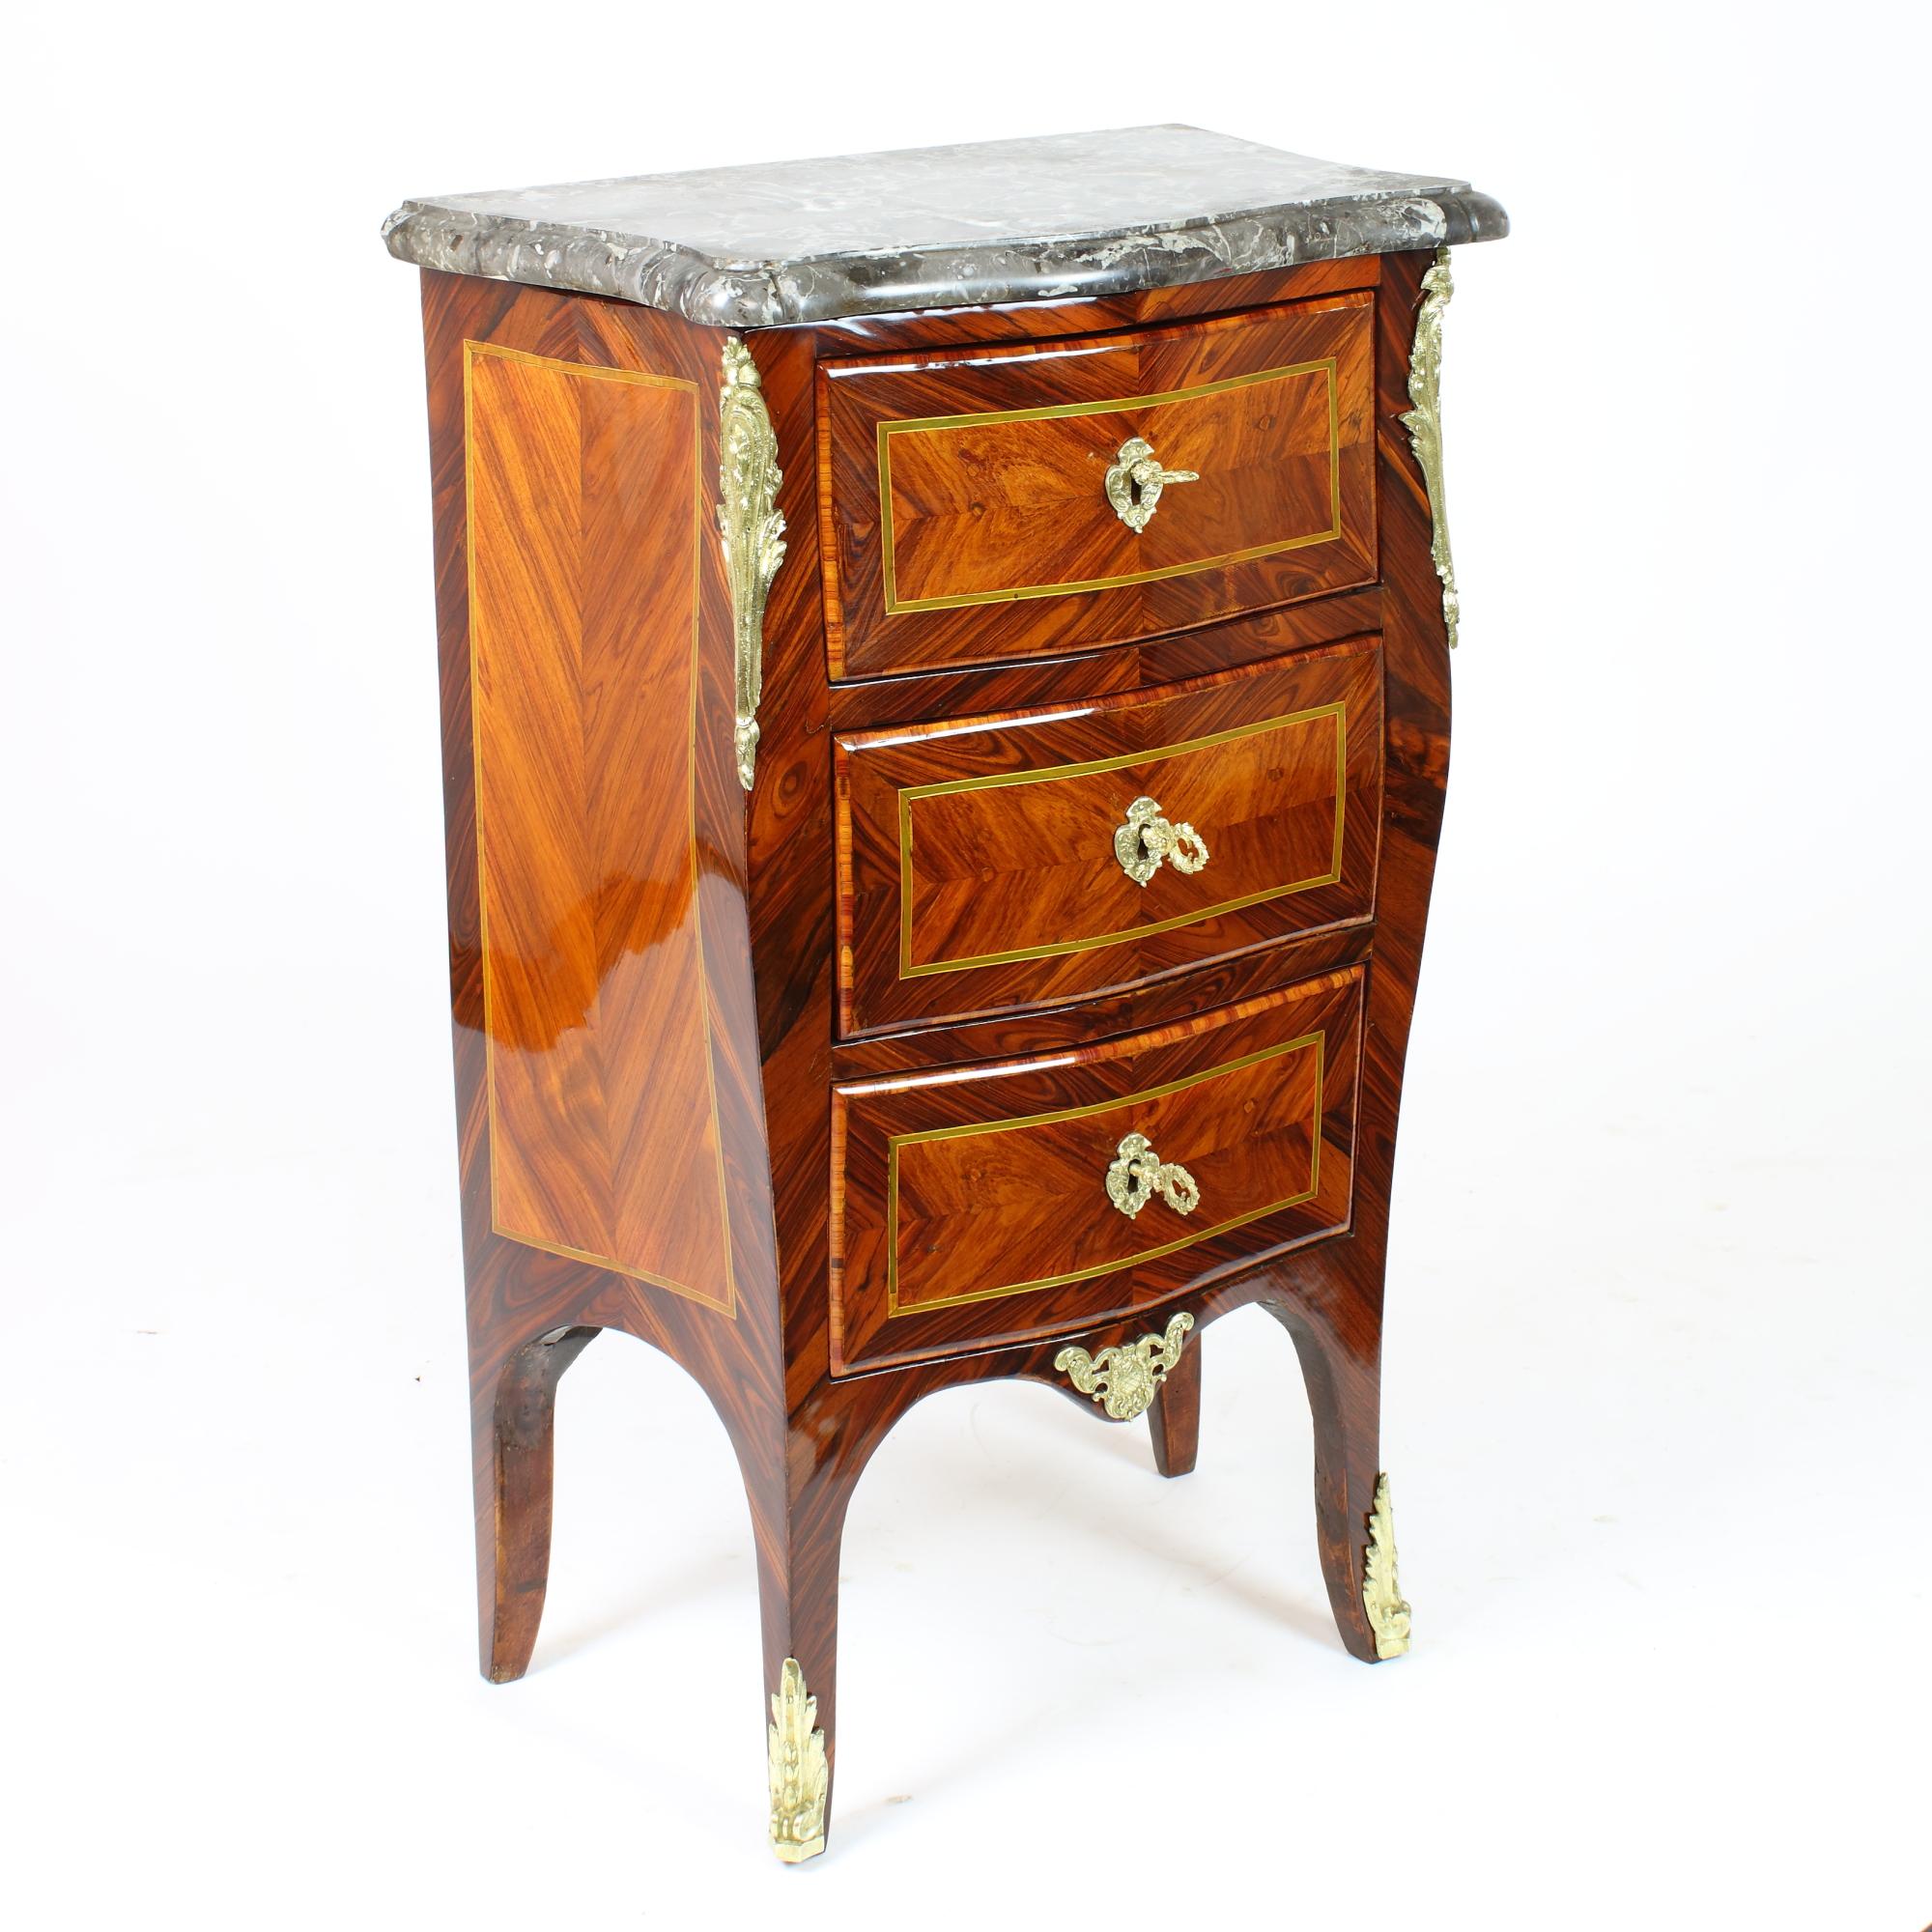 French 18th century small Louis XV marquetry commode, stamped 